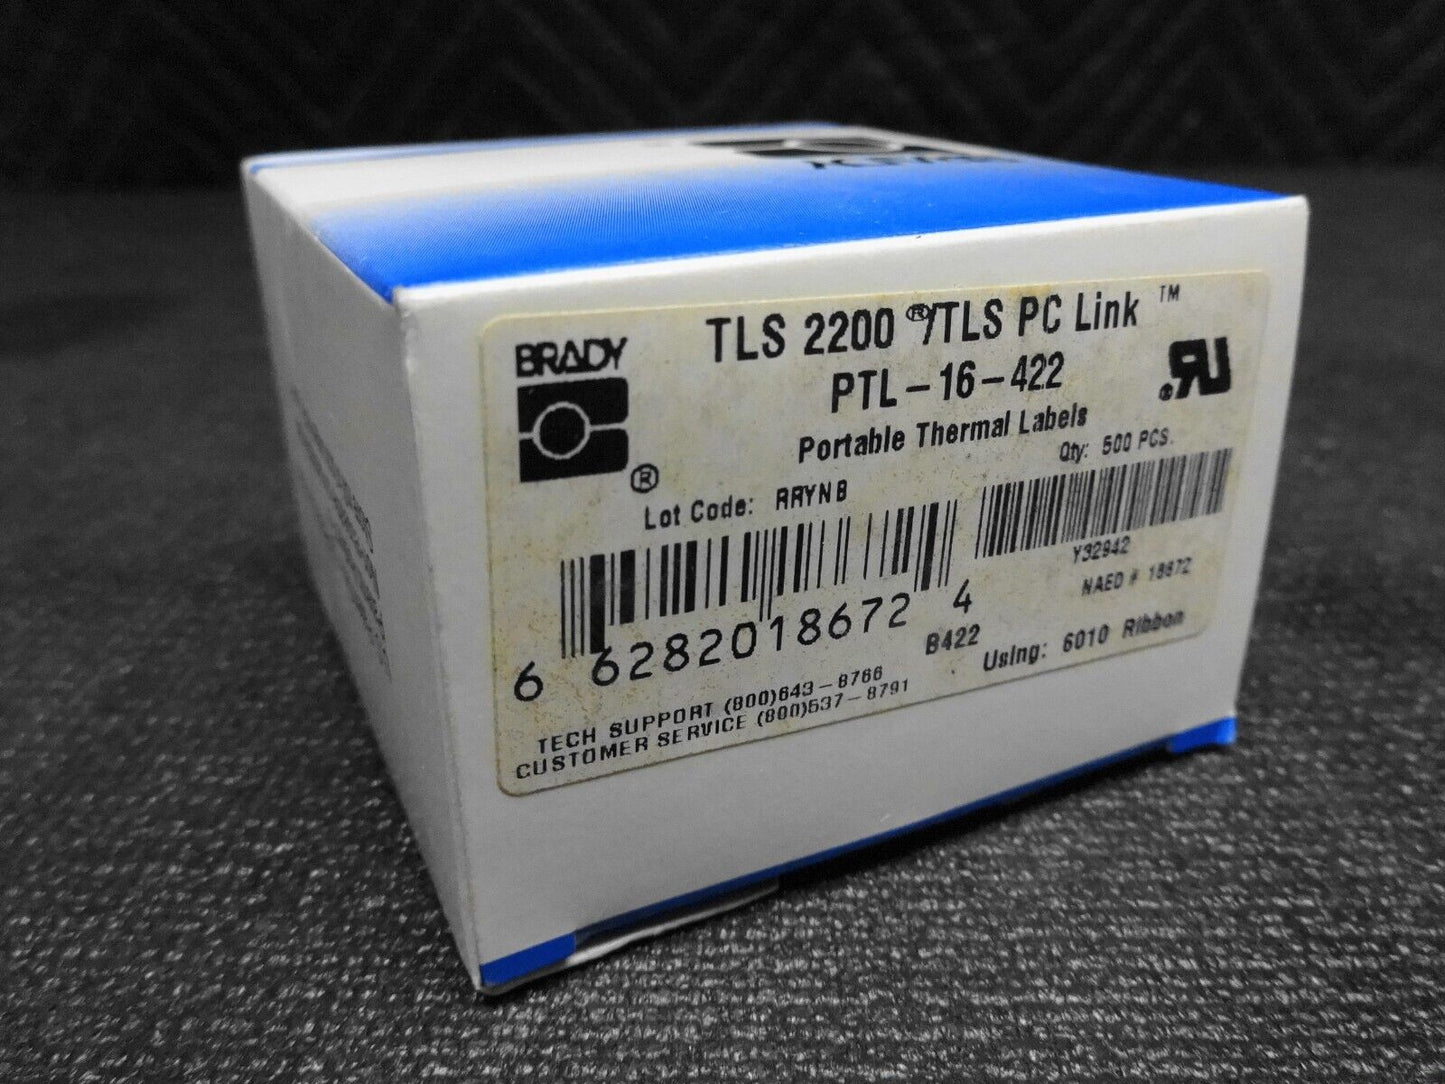 New Brady PTL-16-422, 500 Portable Thermal Labels